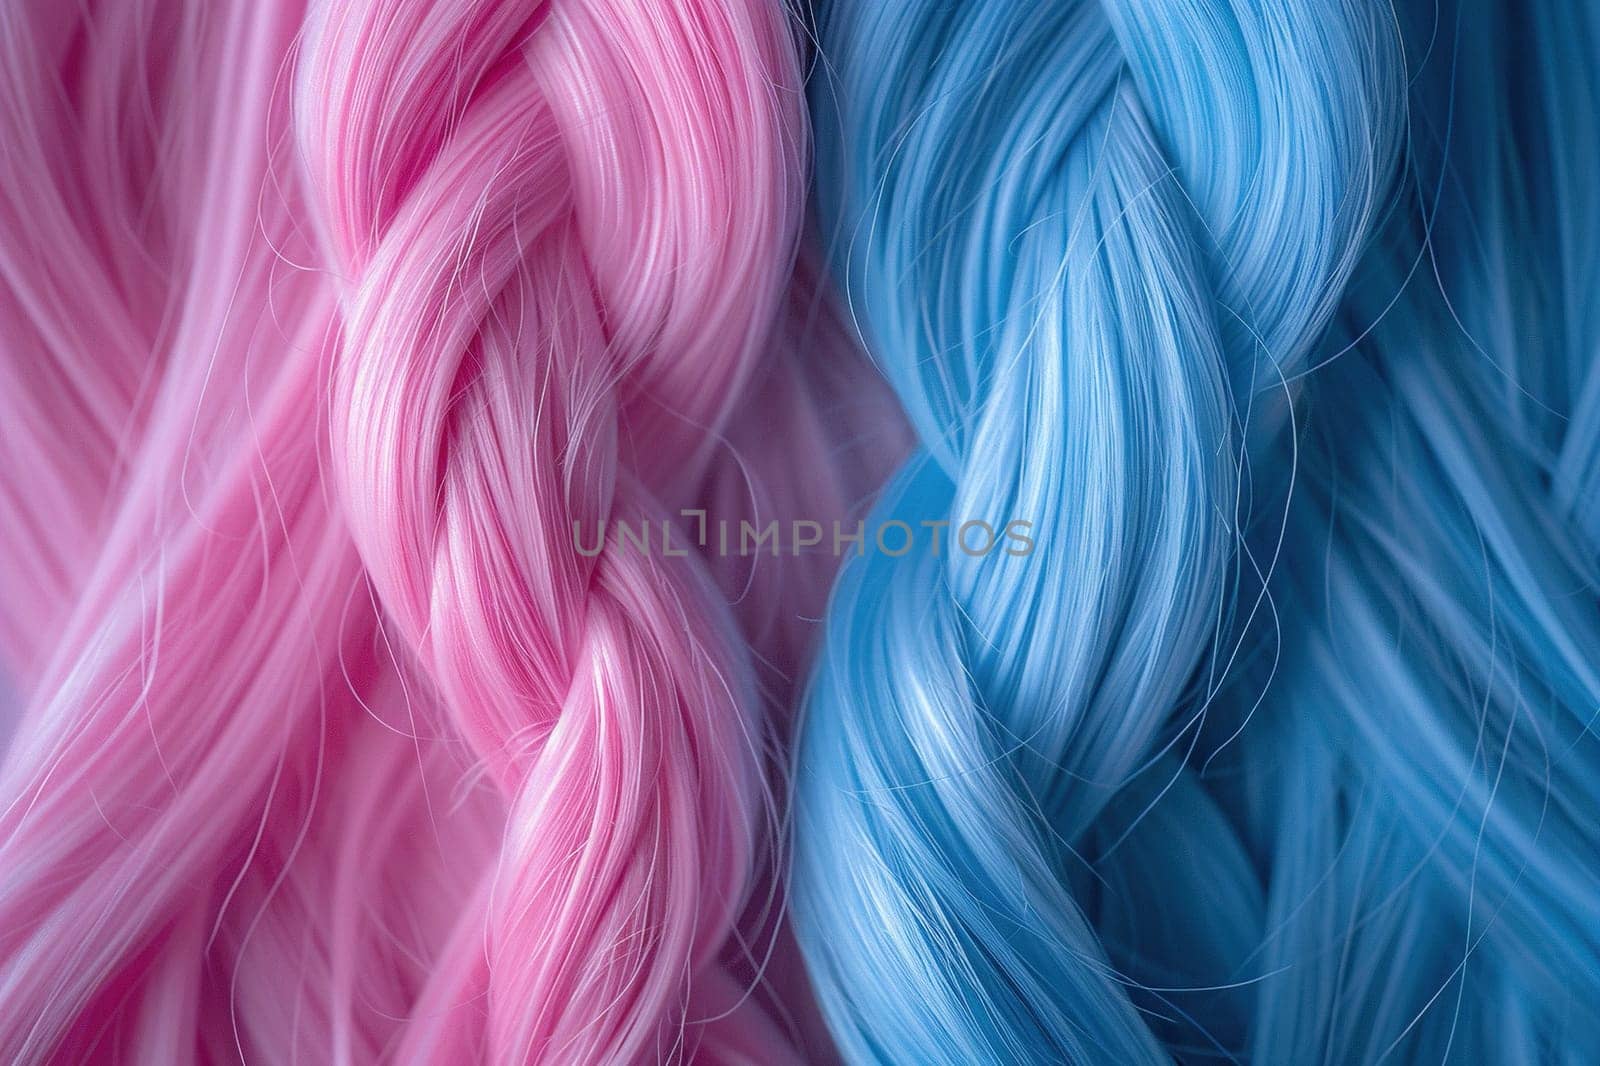 Pink and blue braids are braided on the girl's hair.